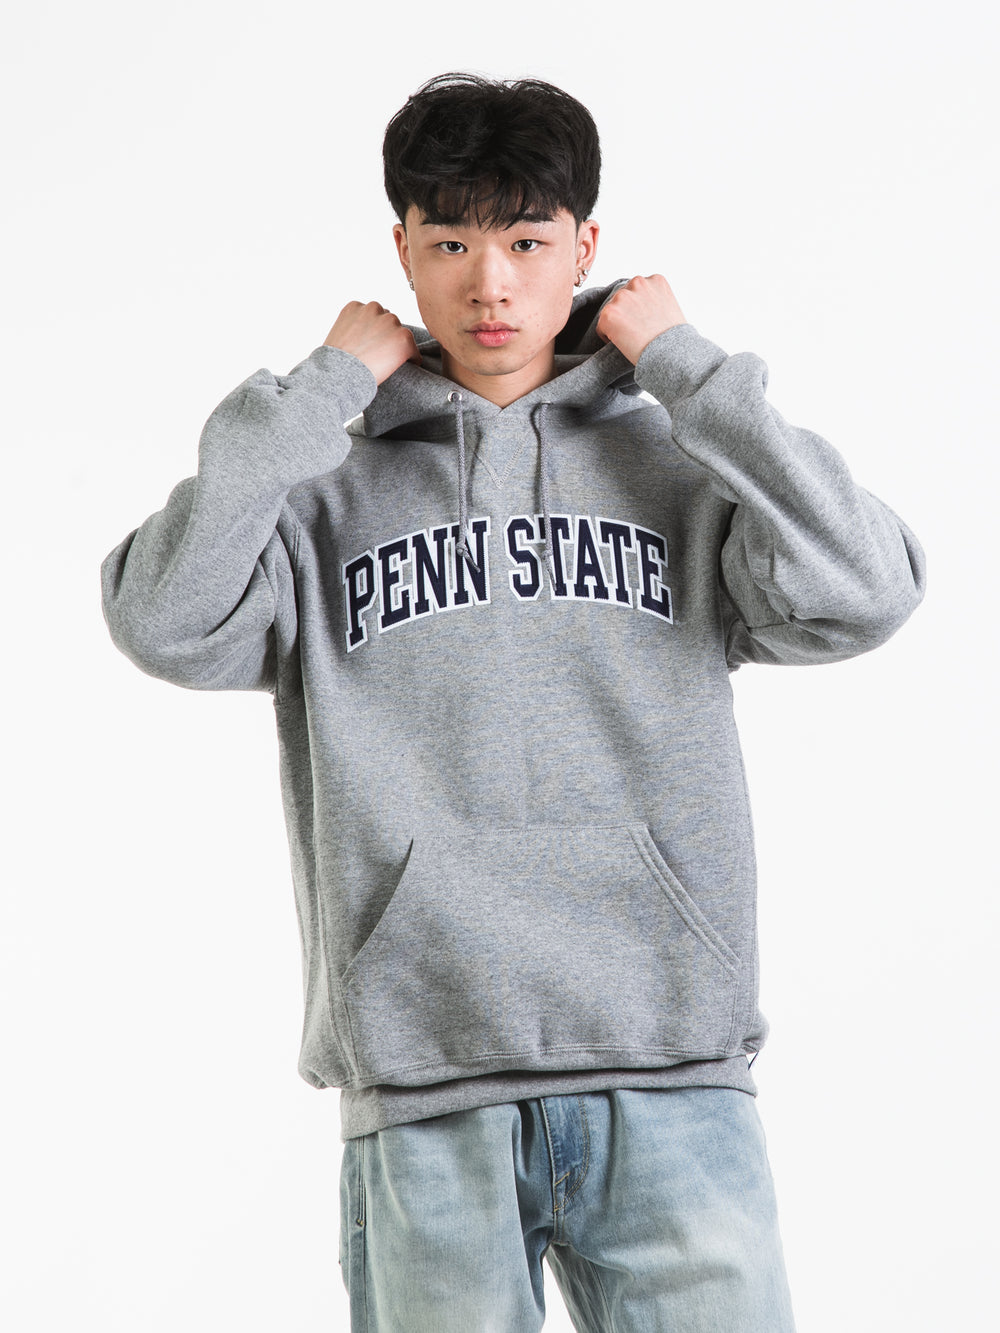 PULL-OVER À CAPUCHE RUSSELL PENN STATEATE - DÉSTOCKAGE